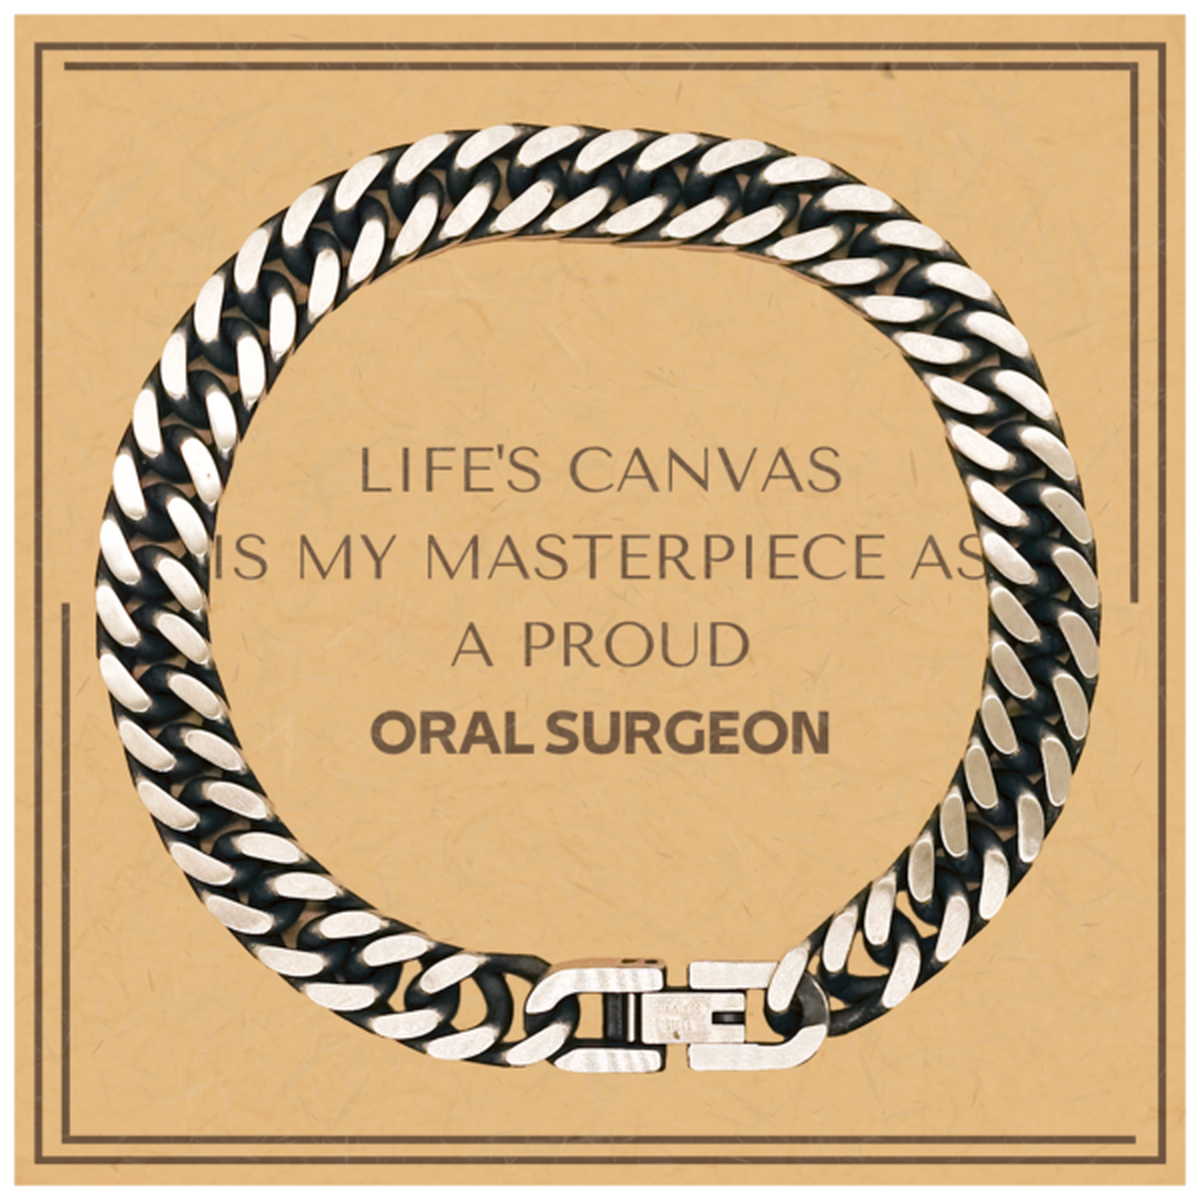 Proud Oral Surgeon Gifts, Life's canvas is my masterpiece, Epic Birthday Christmas Unique Cuban Link Chain Bracelet For Oral Surgeon, Coworkers, Men, Women, Friends